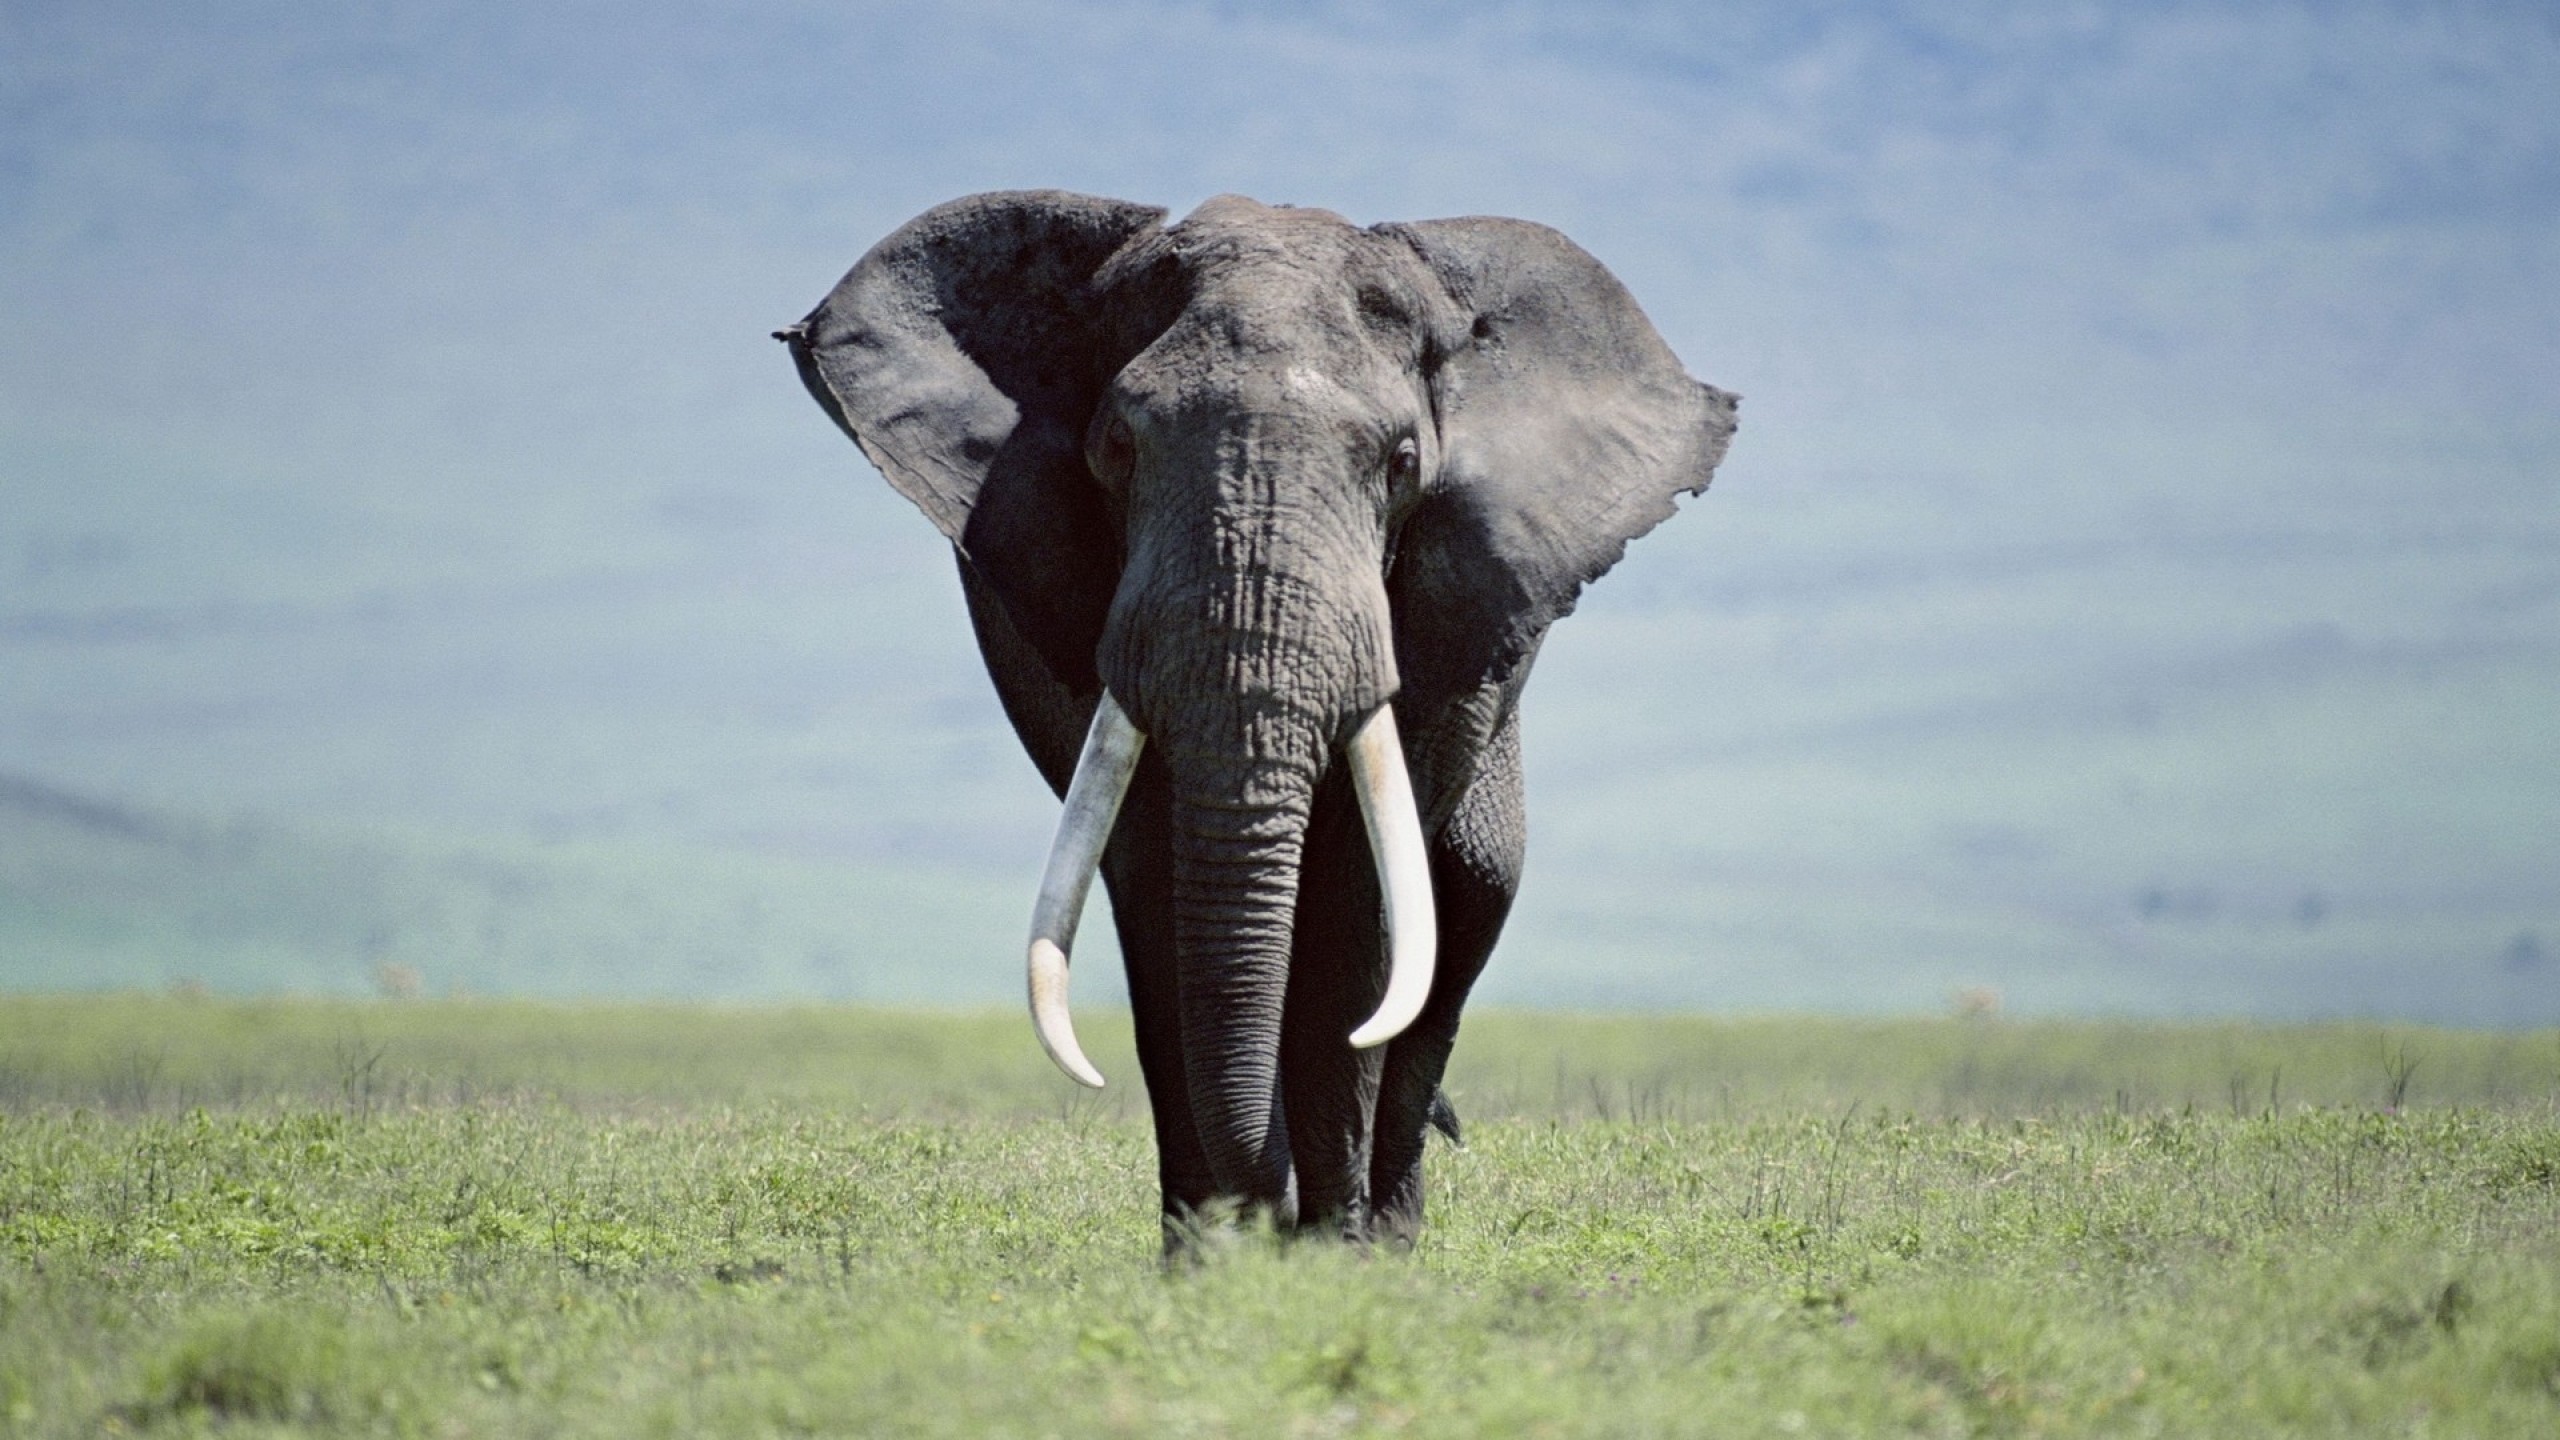 An elephant stands in a grassy field. - Elephant